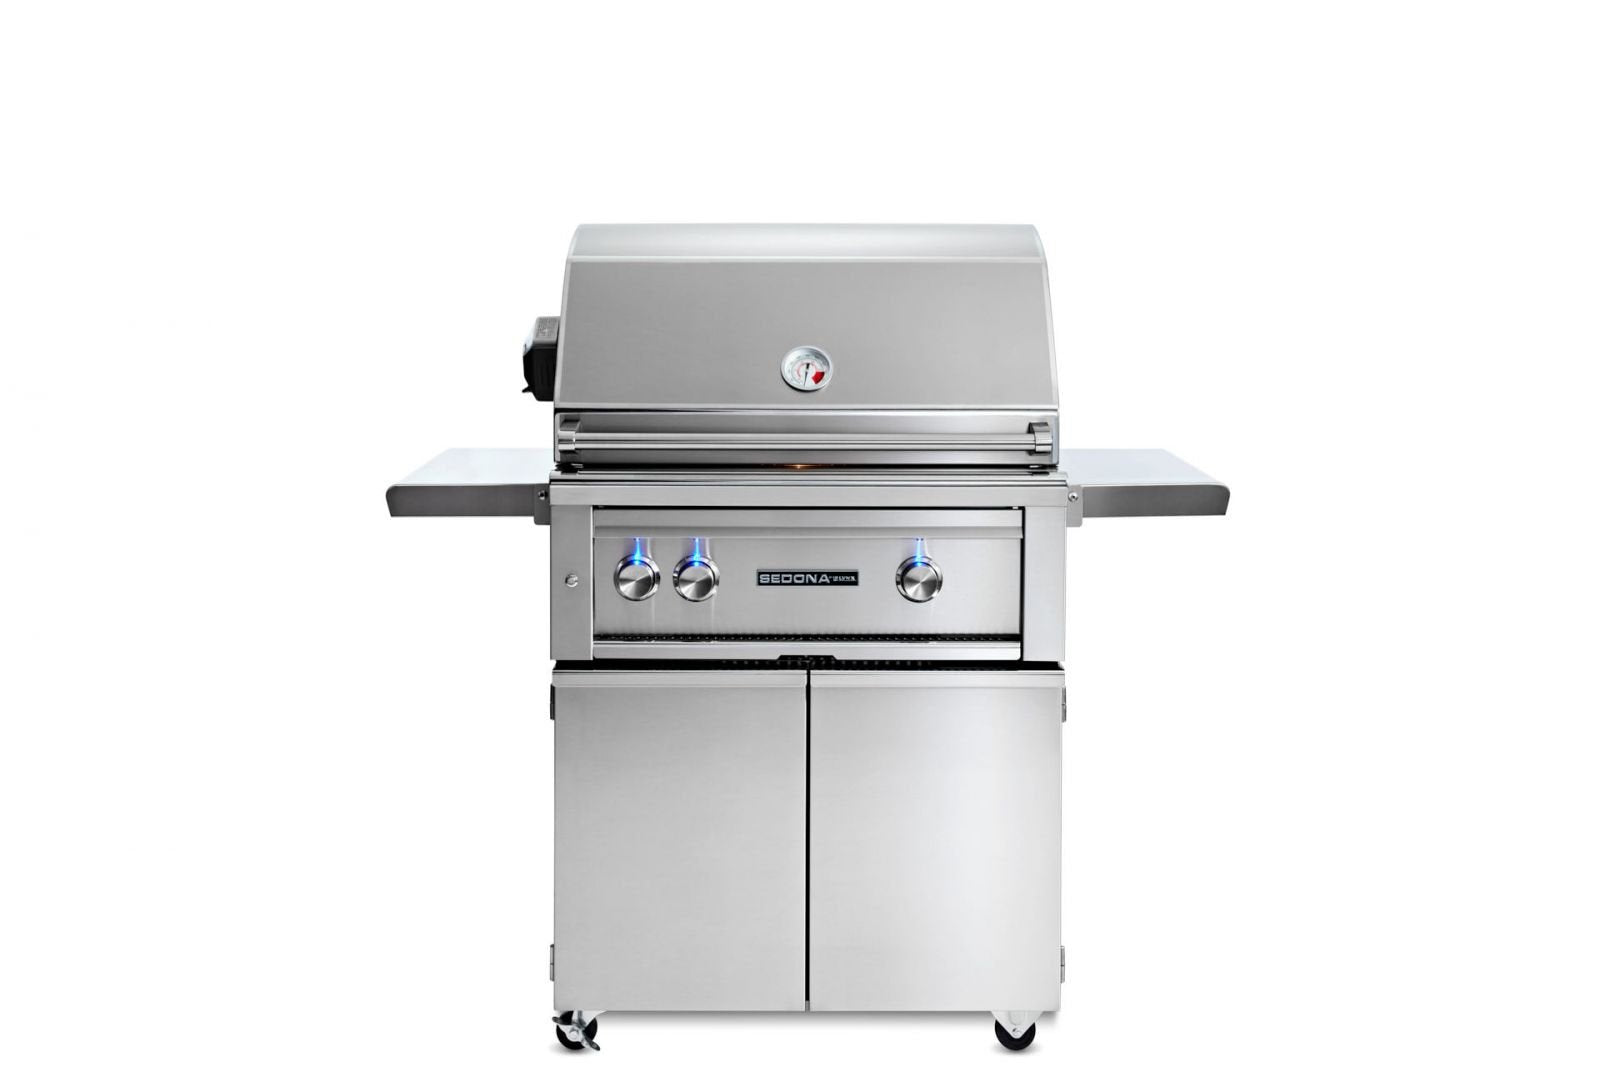 30" Freestanding Grill with 1 Prosear Infrared Burner and 1 Stainless Steel Burner and Rotisserie (L500PSFR)